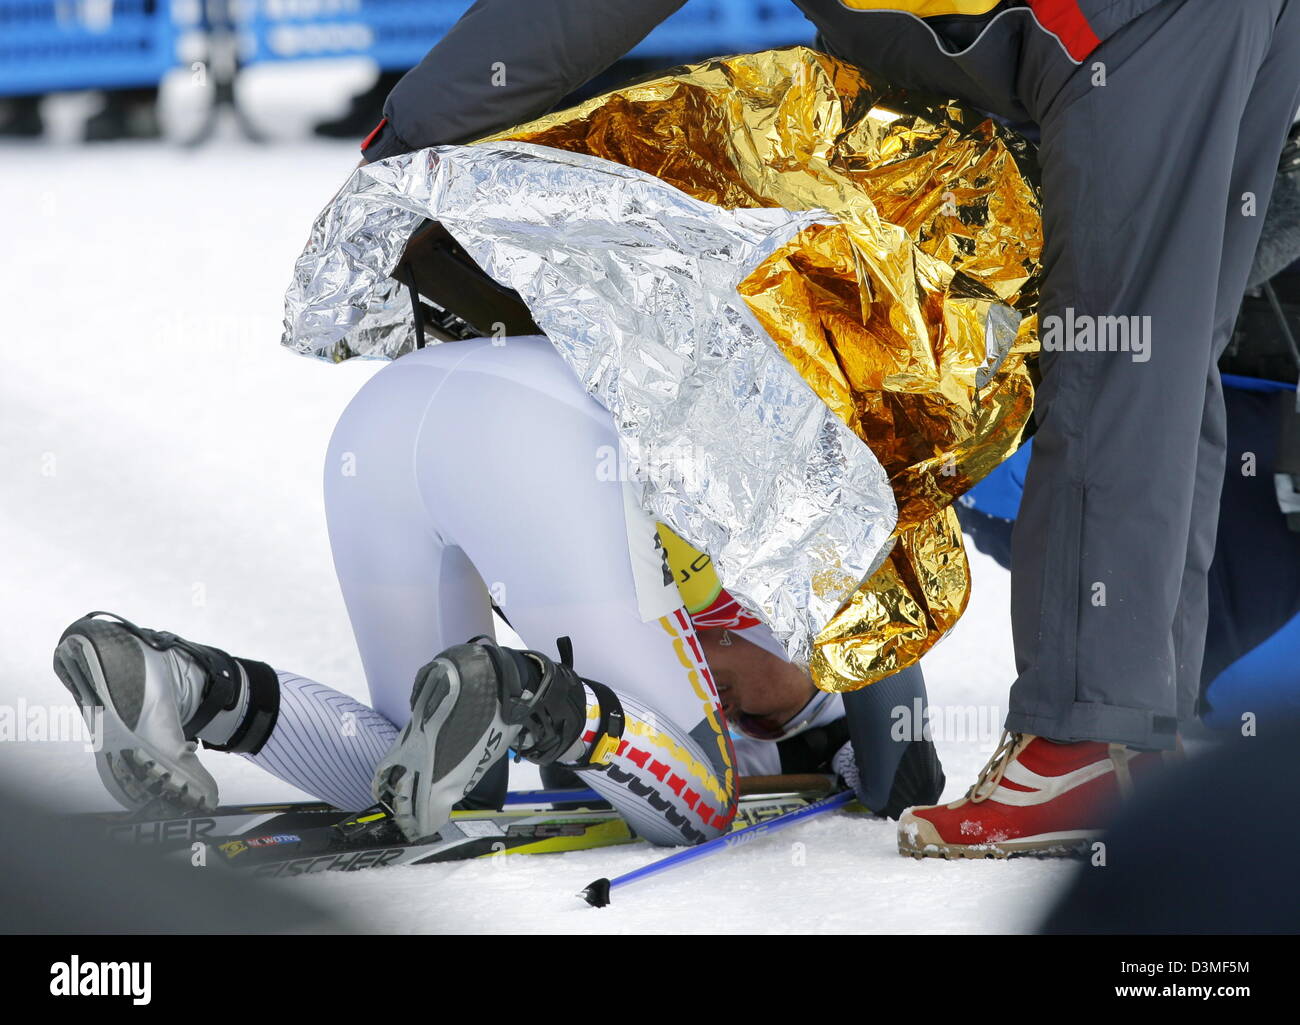 An aid covers exhausted German biathlete Katrin Apel with a thermo blanket in the Women's 4 x 6 km Biathlon Relay at the Olympic Winter Games in San Sicario, Italy, Thursday, 23 February 2006. The German women's relay team won silver. Photo: Arne Dedert Stock Photo